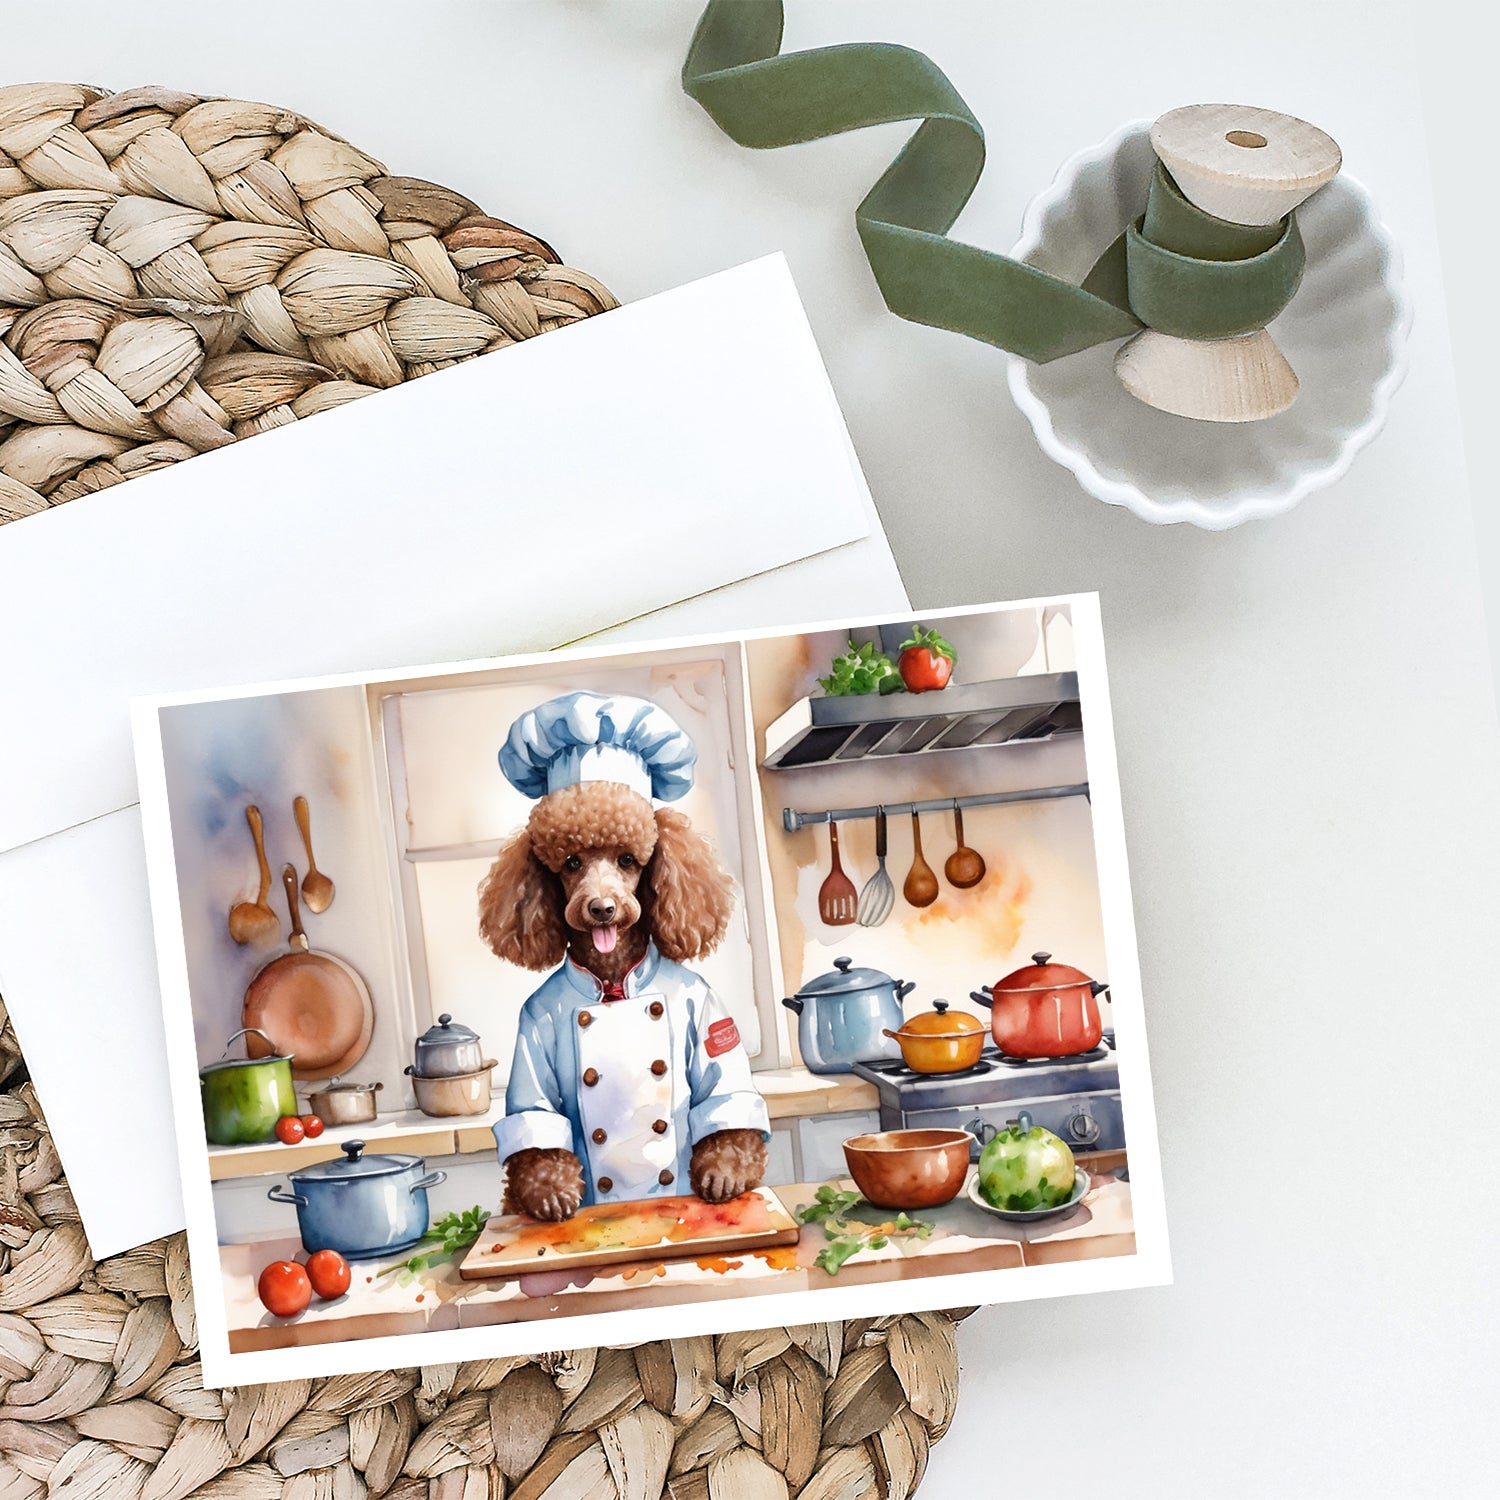 Buy this Chocolate Poodle The Chef Greeting Cards Pack of 8